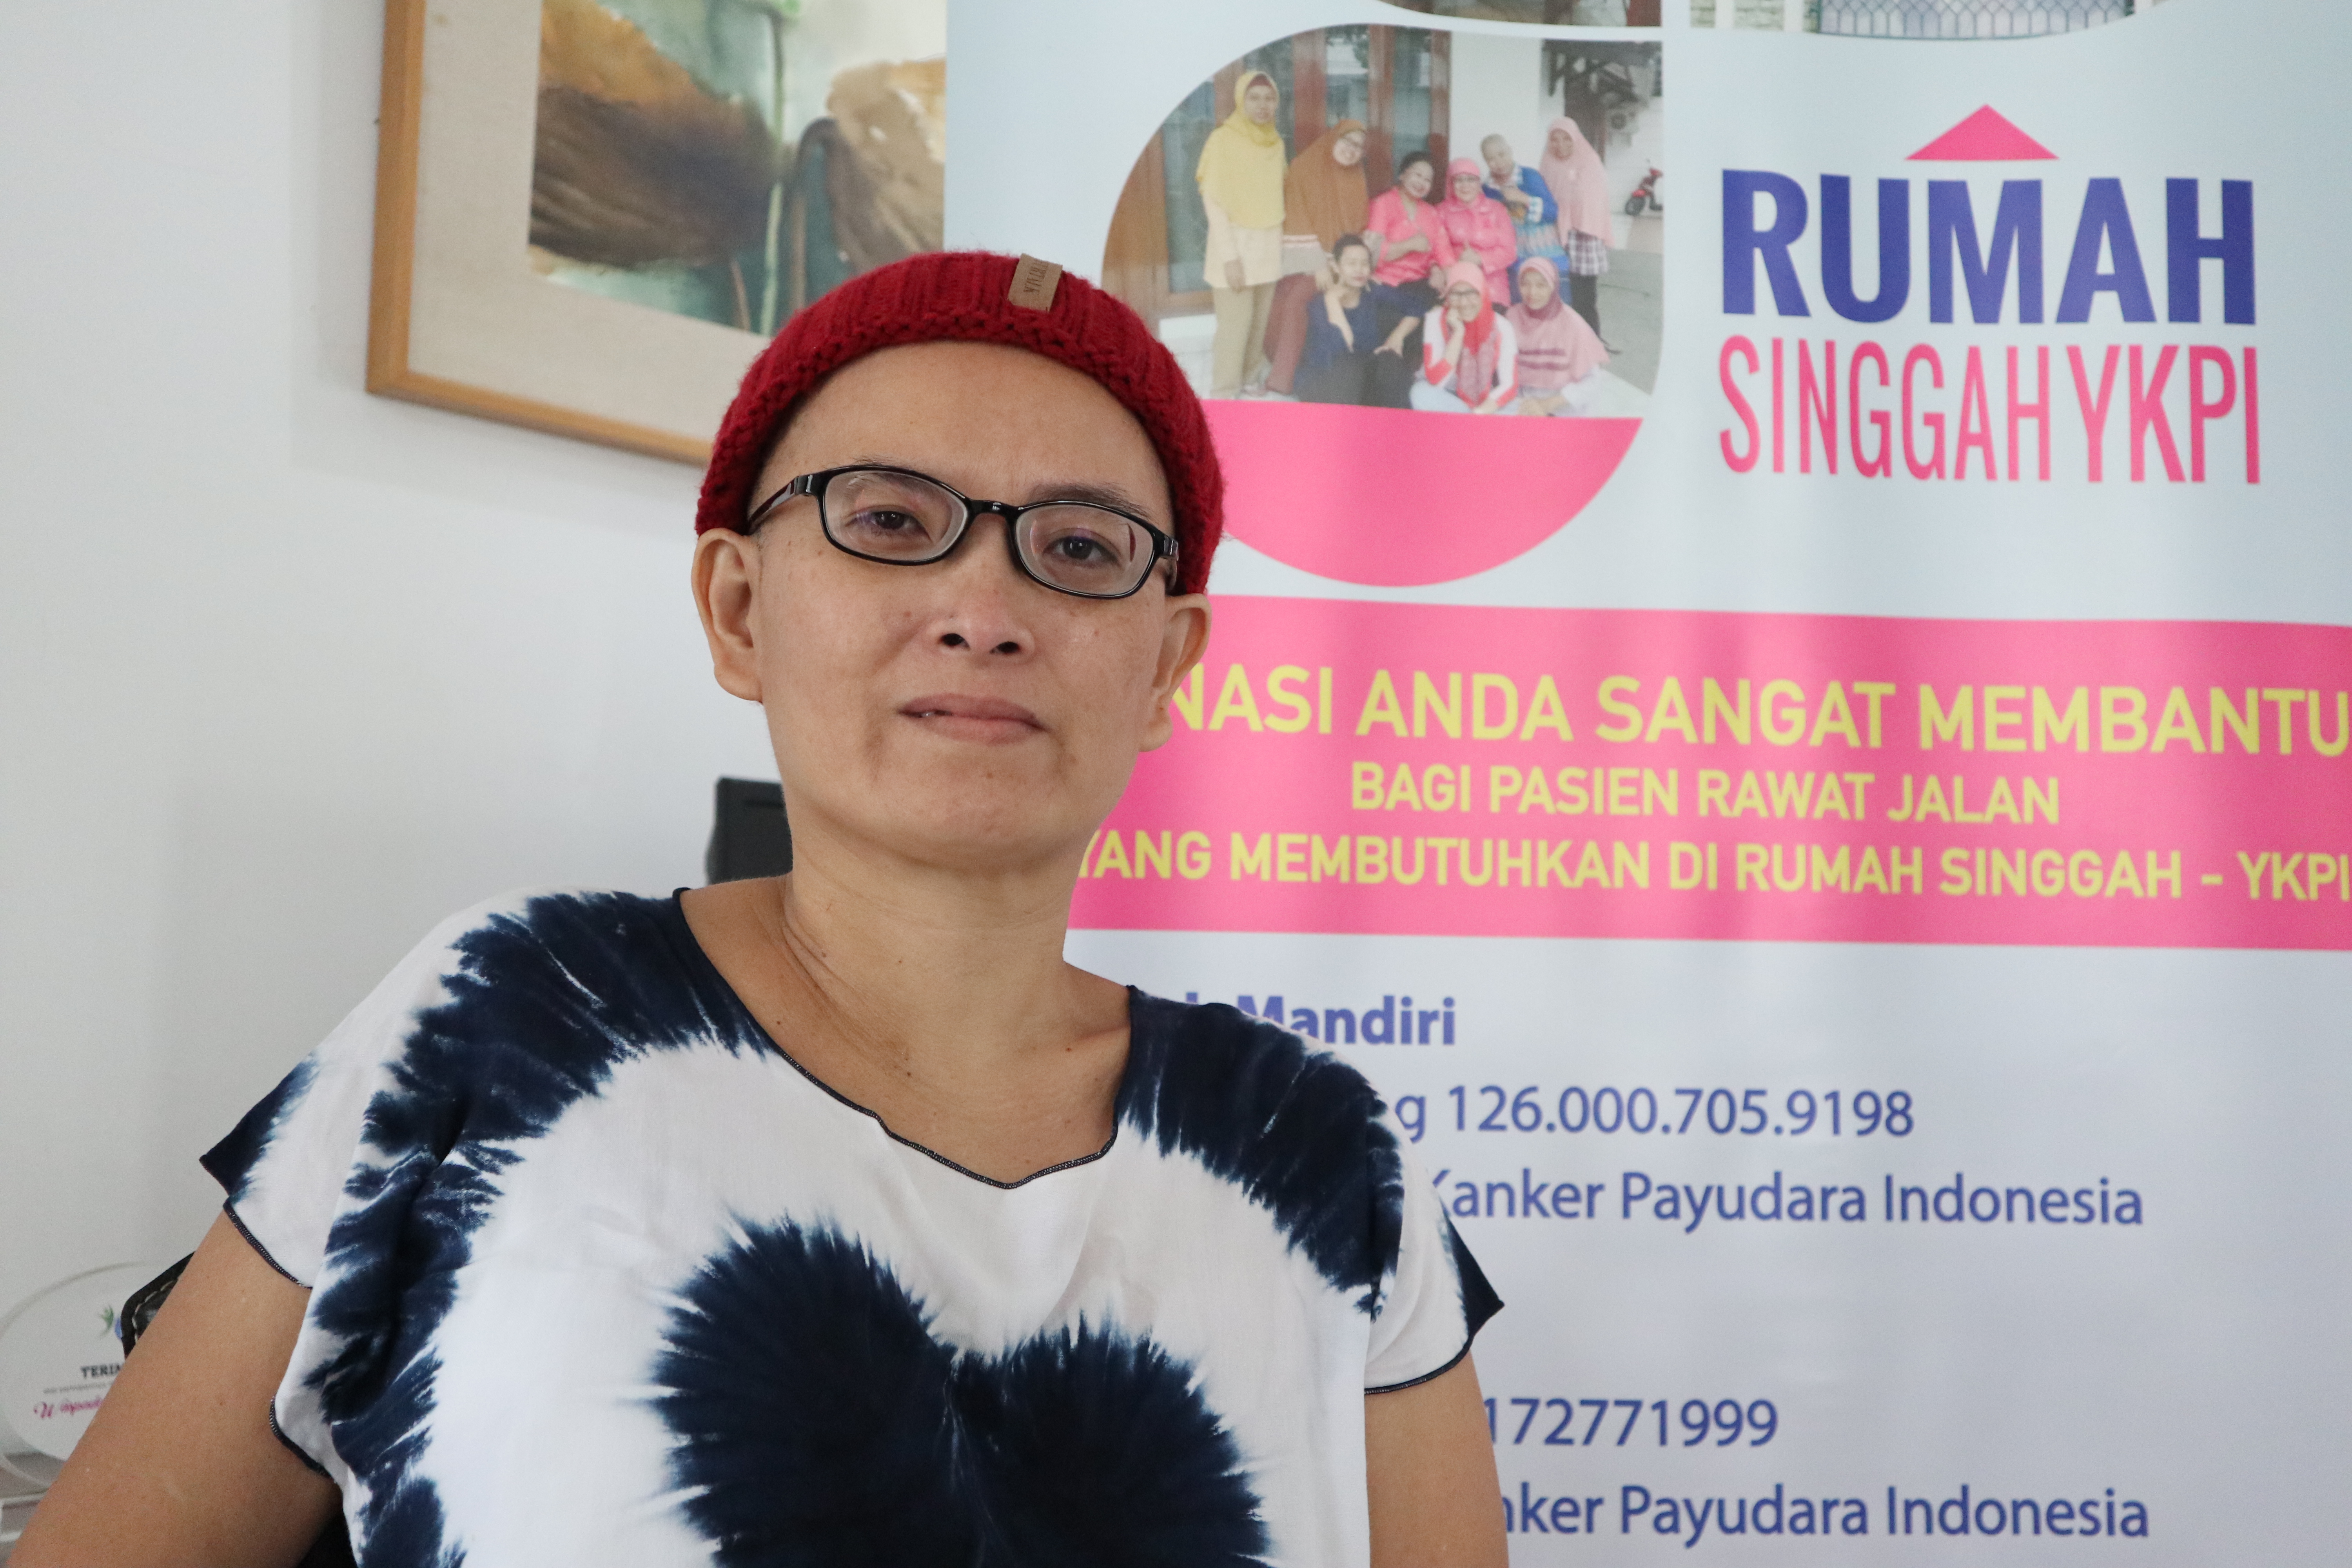 Japong Cries in Gratefulness as She Can Stay at Rumah Singgah YKPI